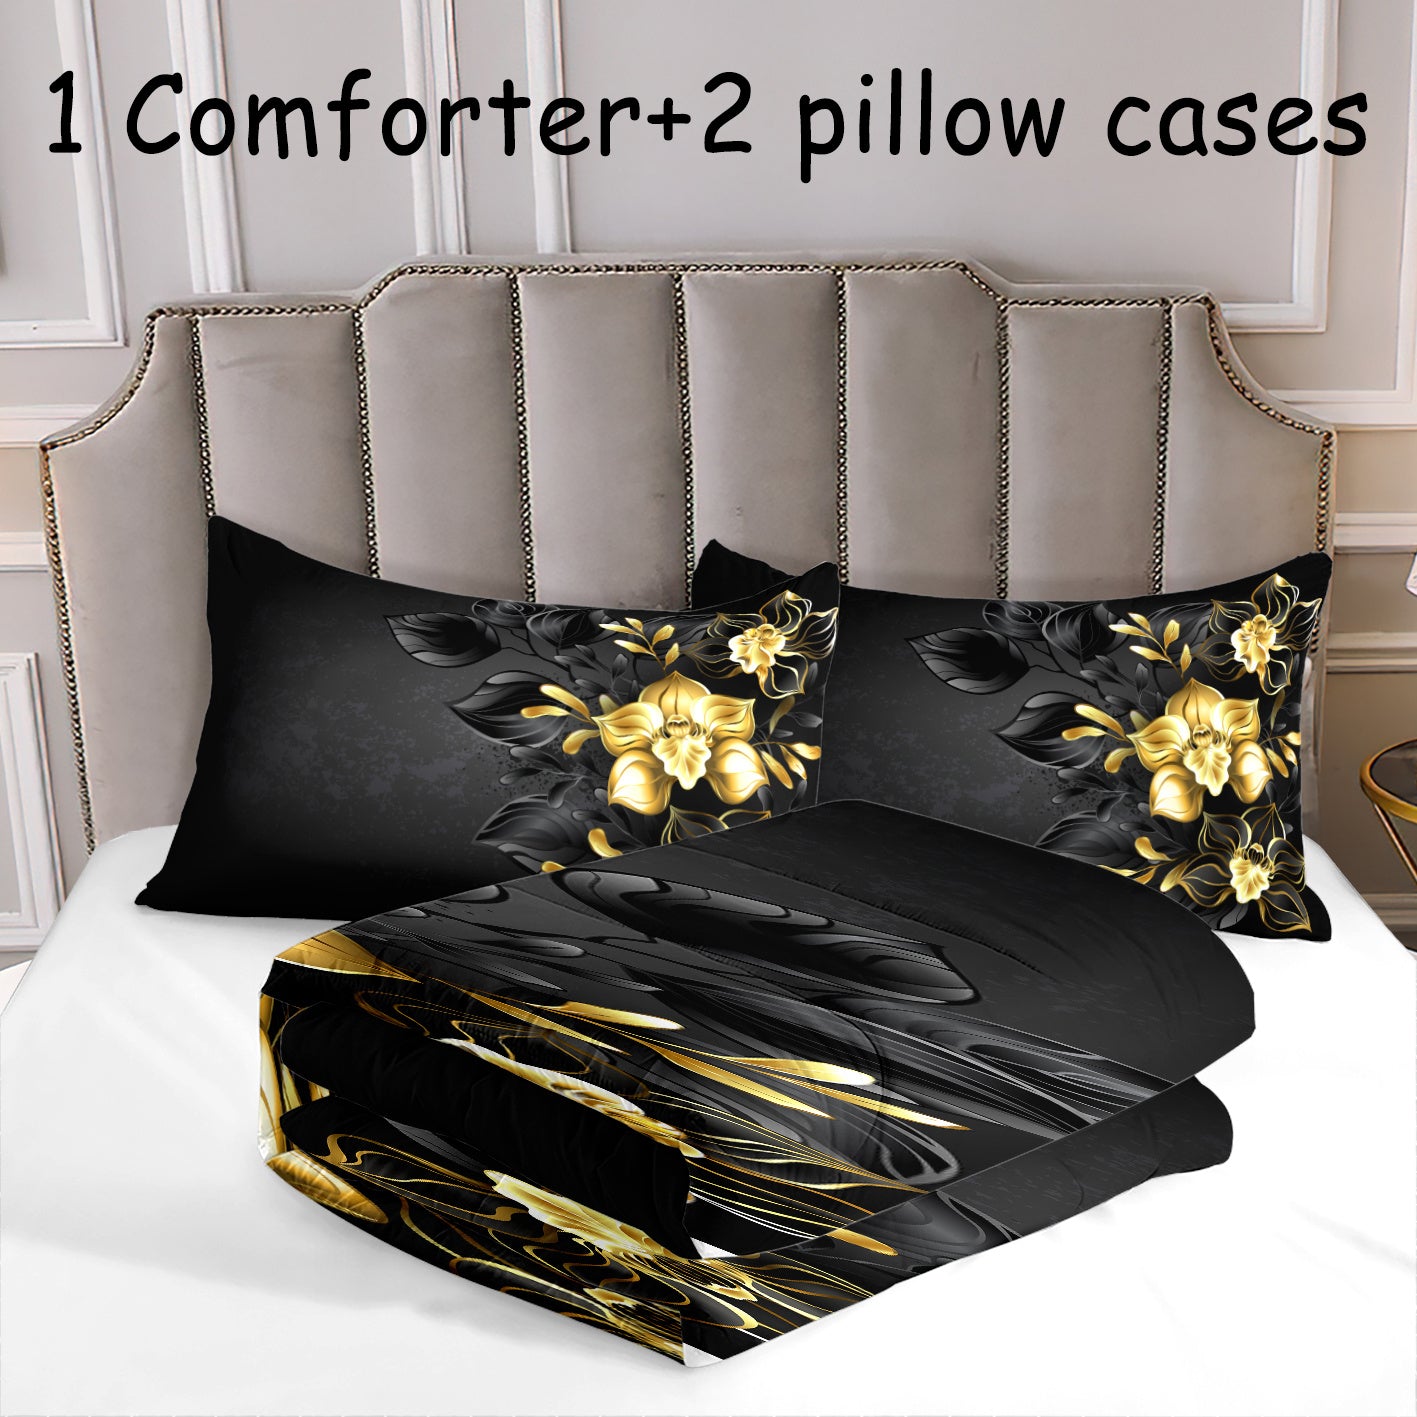 3pcs Fashion Luxury Comforter Set (1*Comforter + 2*Pillowcase, Without Core), Black And Golden Floral Print Bedding Set, Soft Comfortable And Skin-friendly Comforter For Bedroom, Guest Room